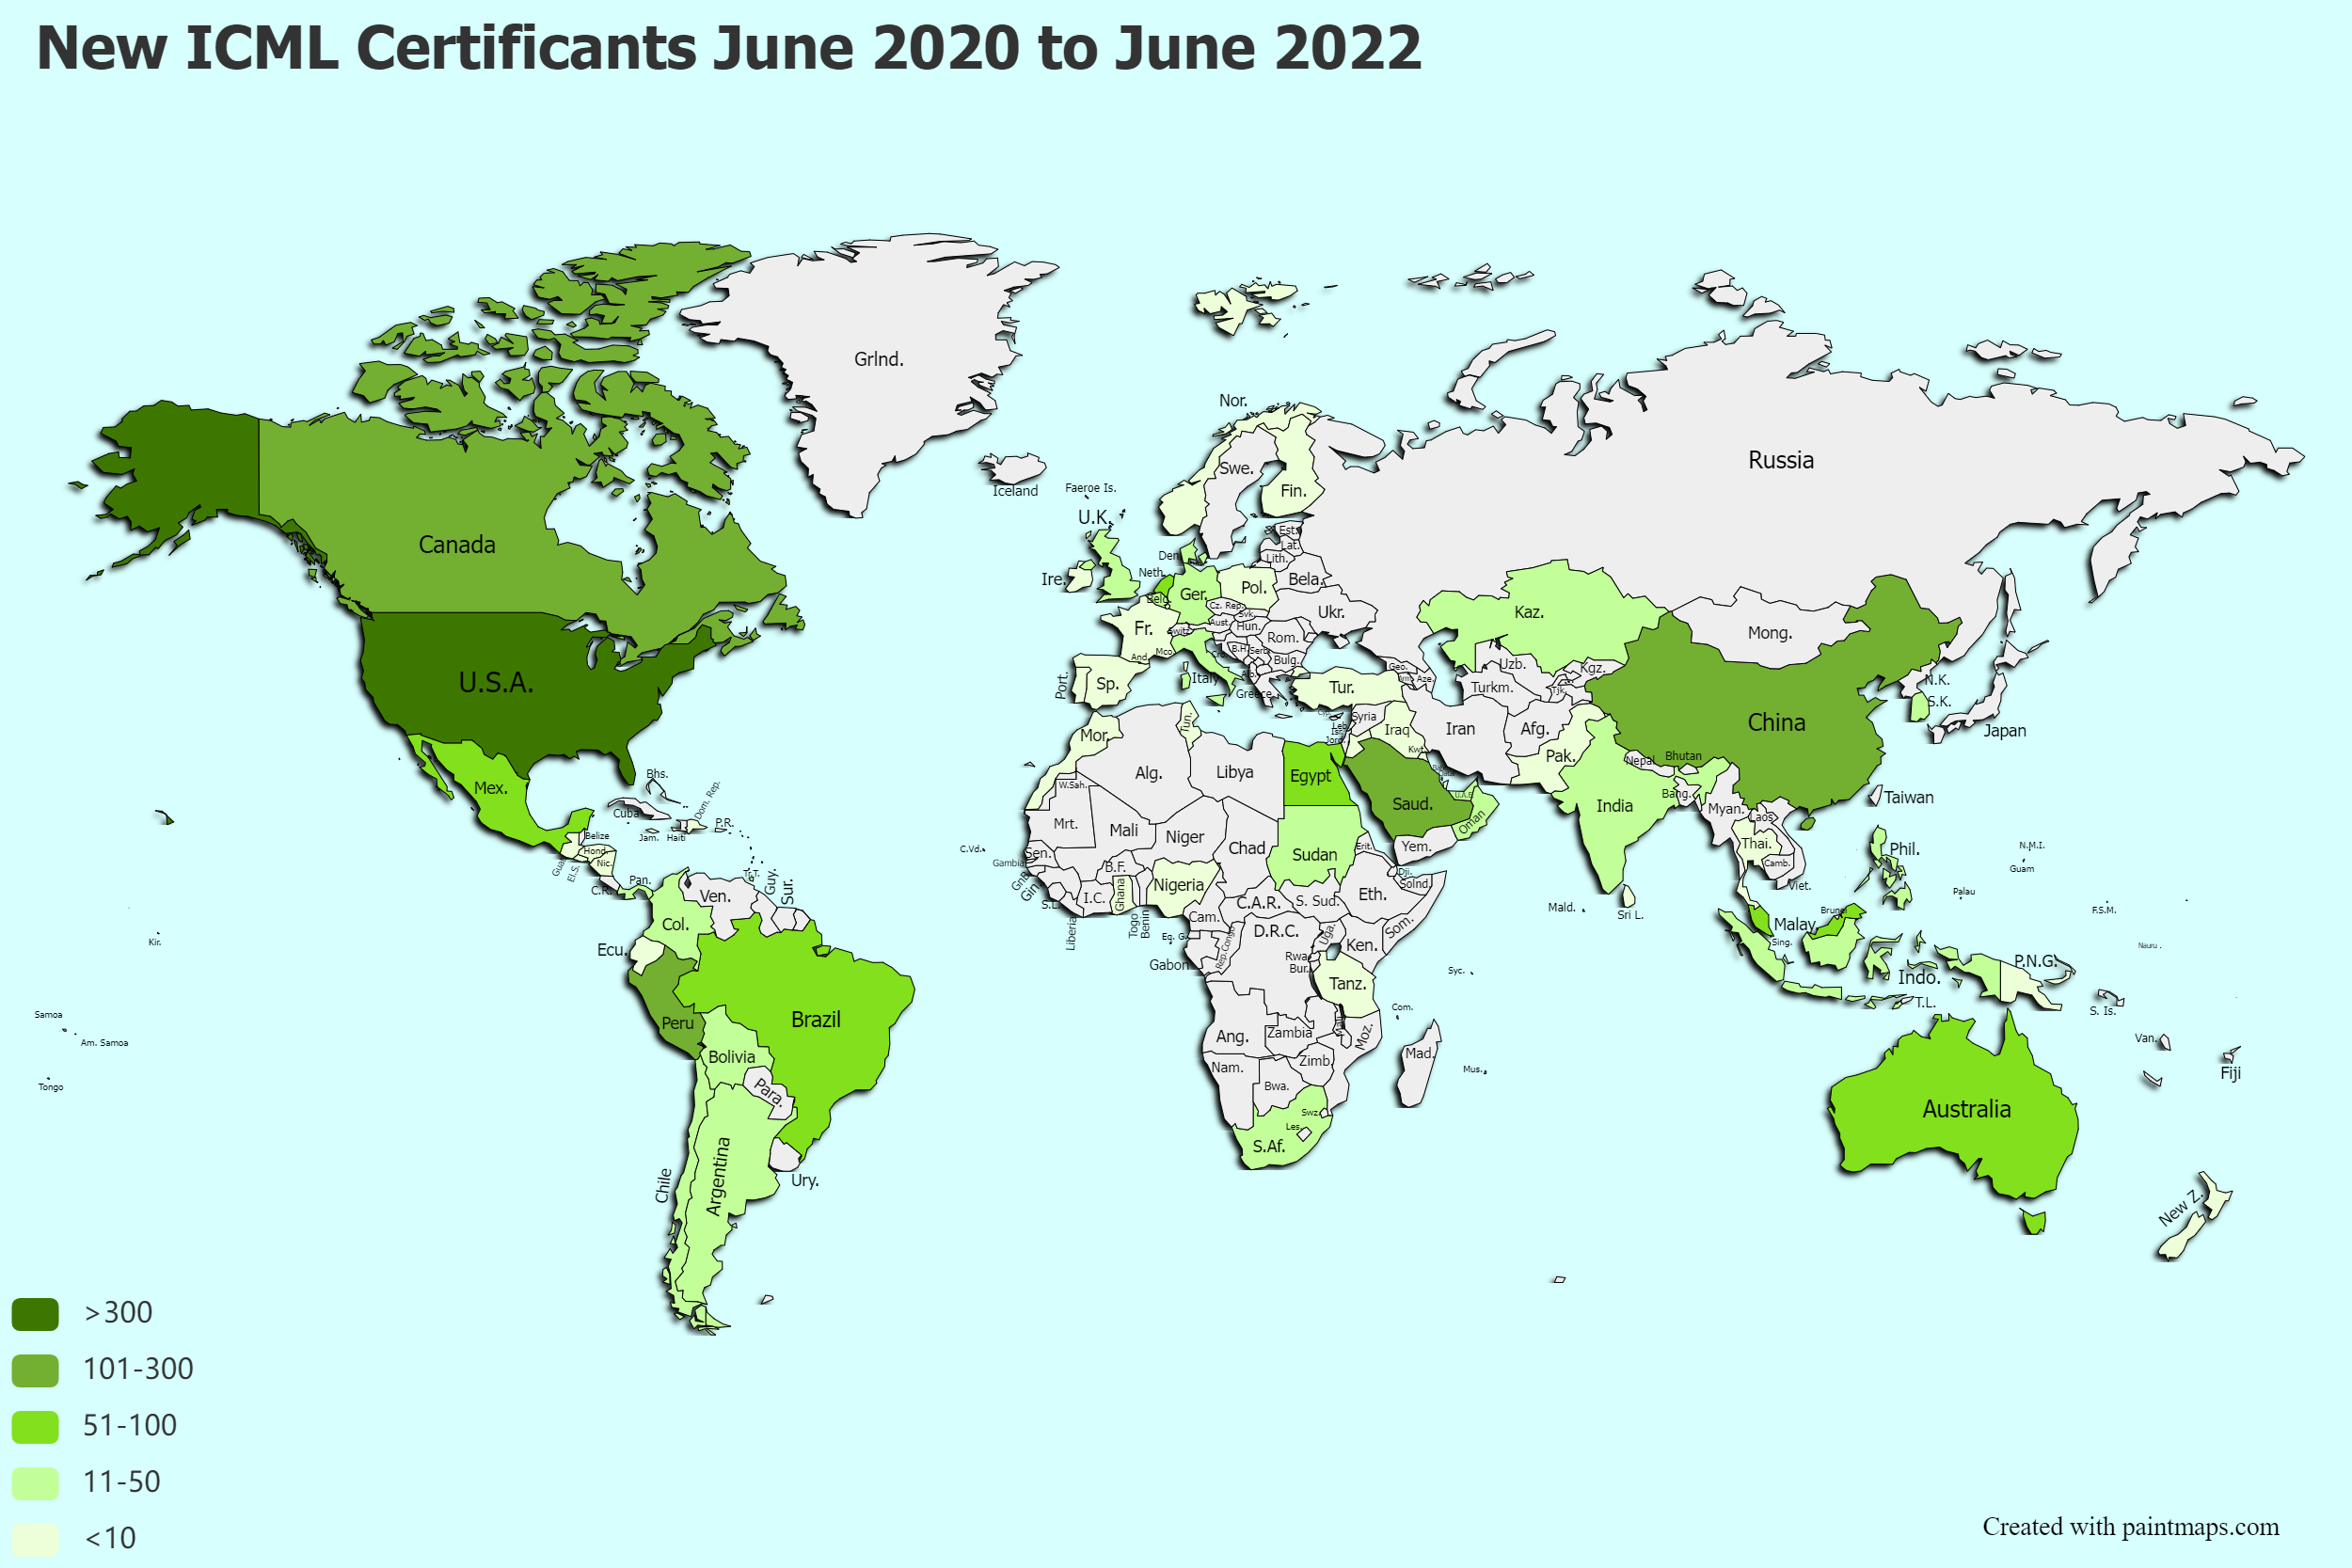 Map showing locations of exams passed by ICML candidates June 2020 to June 2022